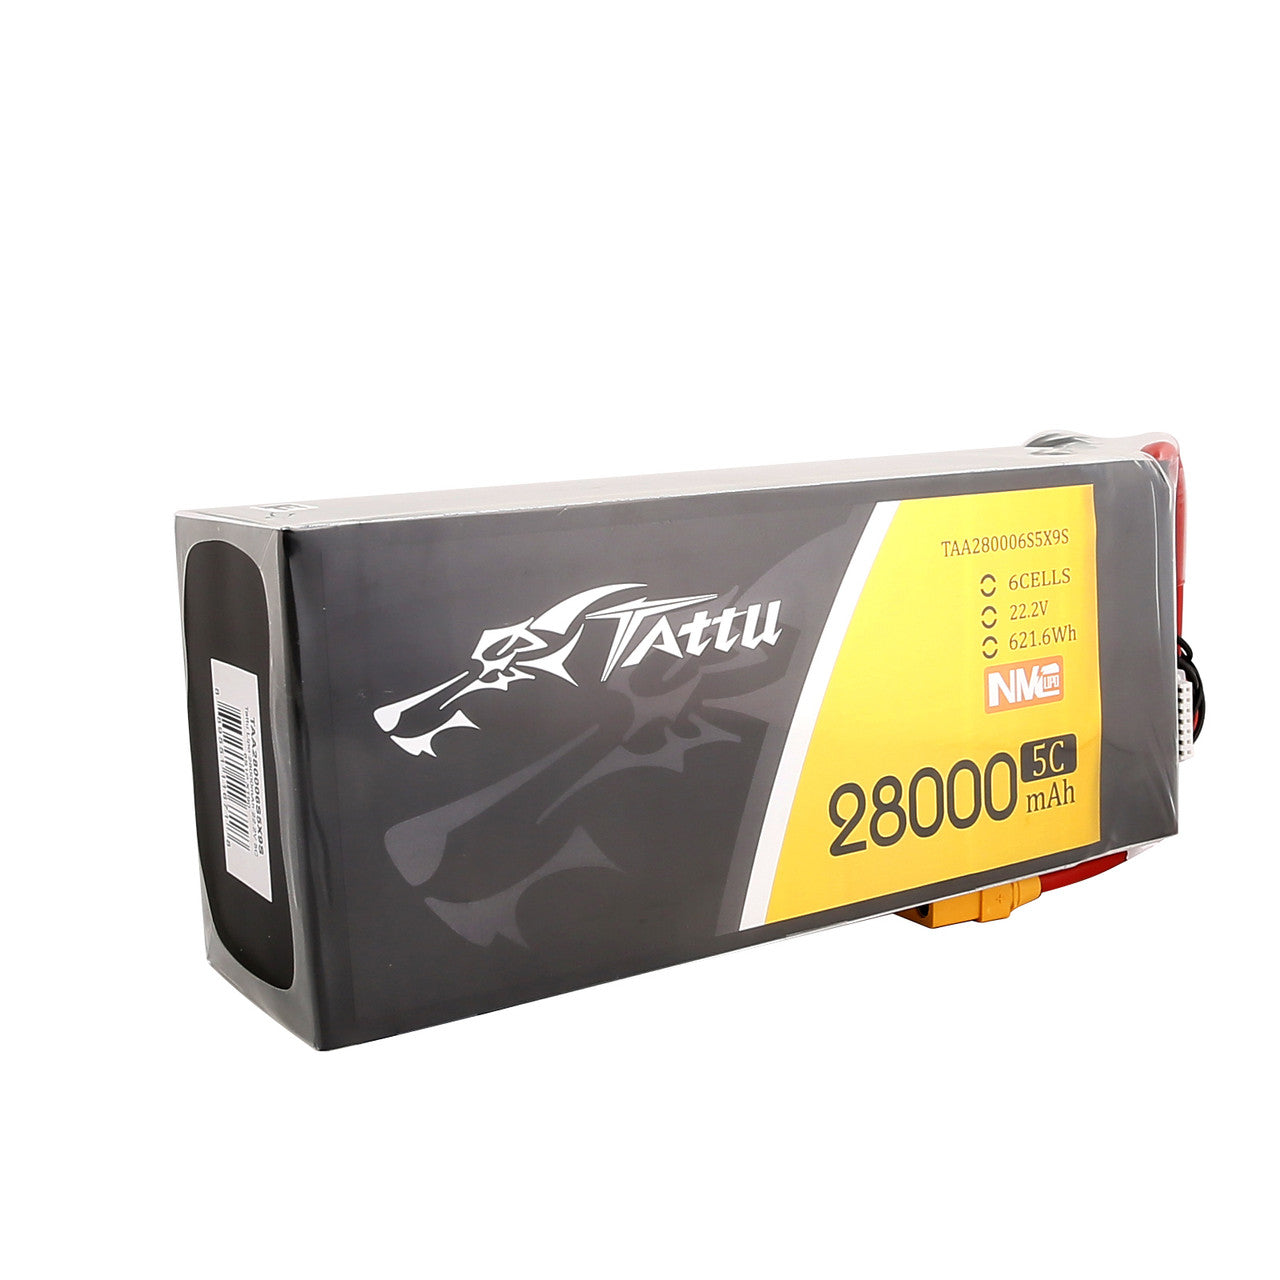 Tattu 28000mAh 6S 5C 22.2V NMC Lipo Battery, Battery pack with lithium-ion cells, 22.2V voltage, and 621.6Wh capacity for powering devices.